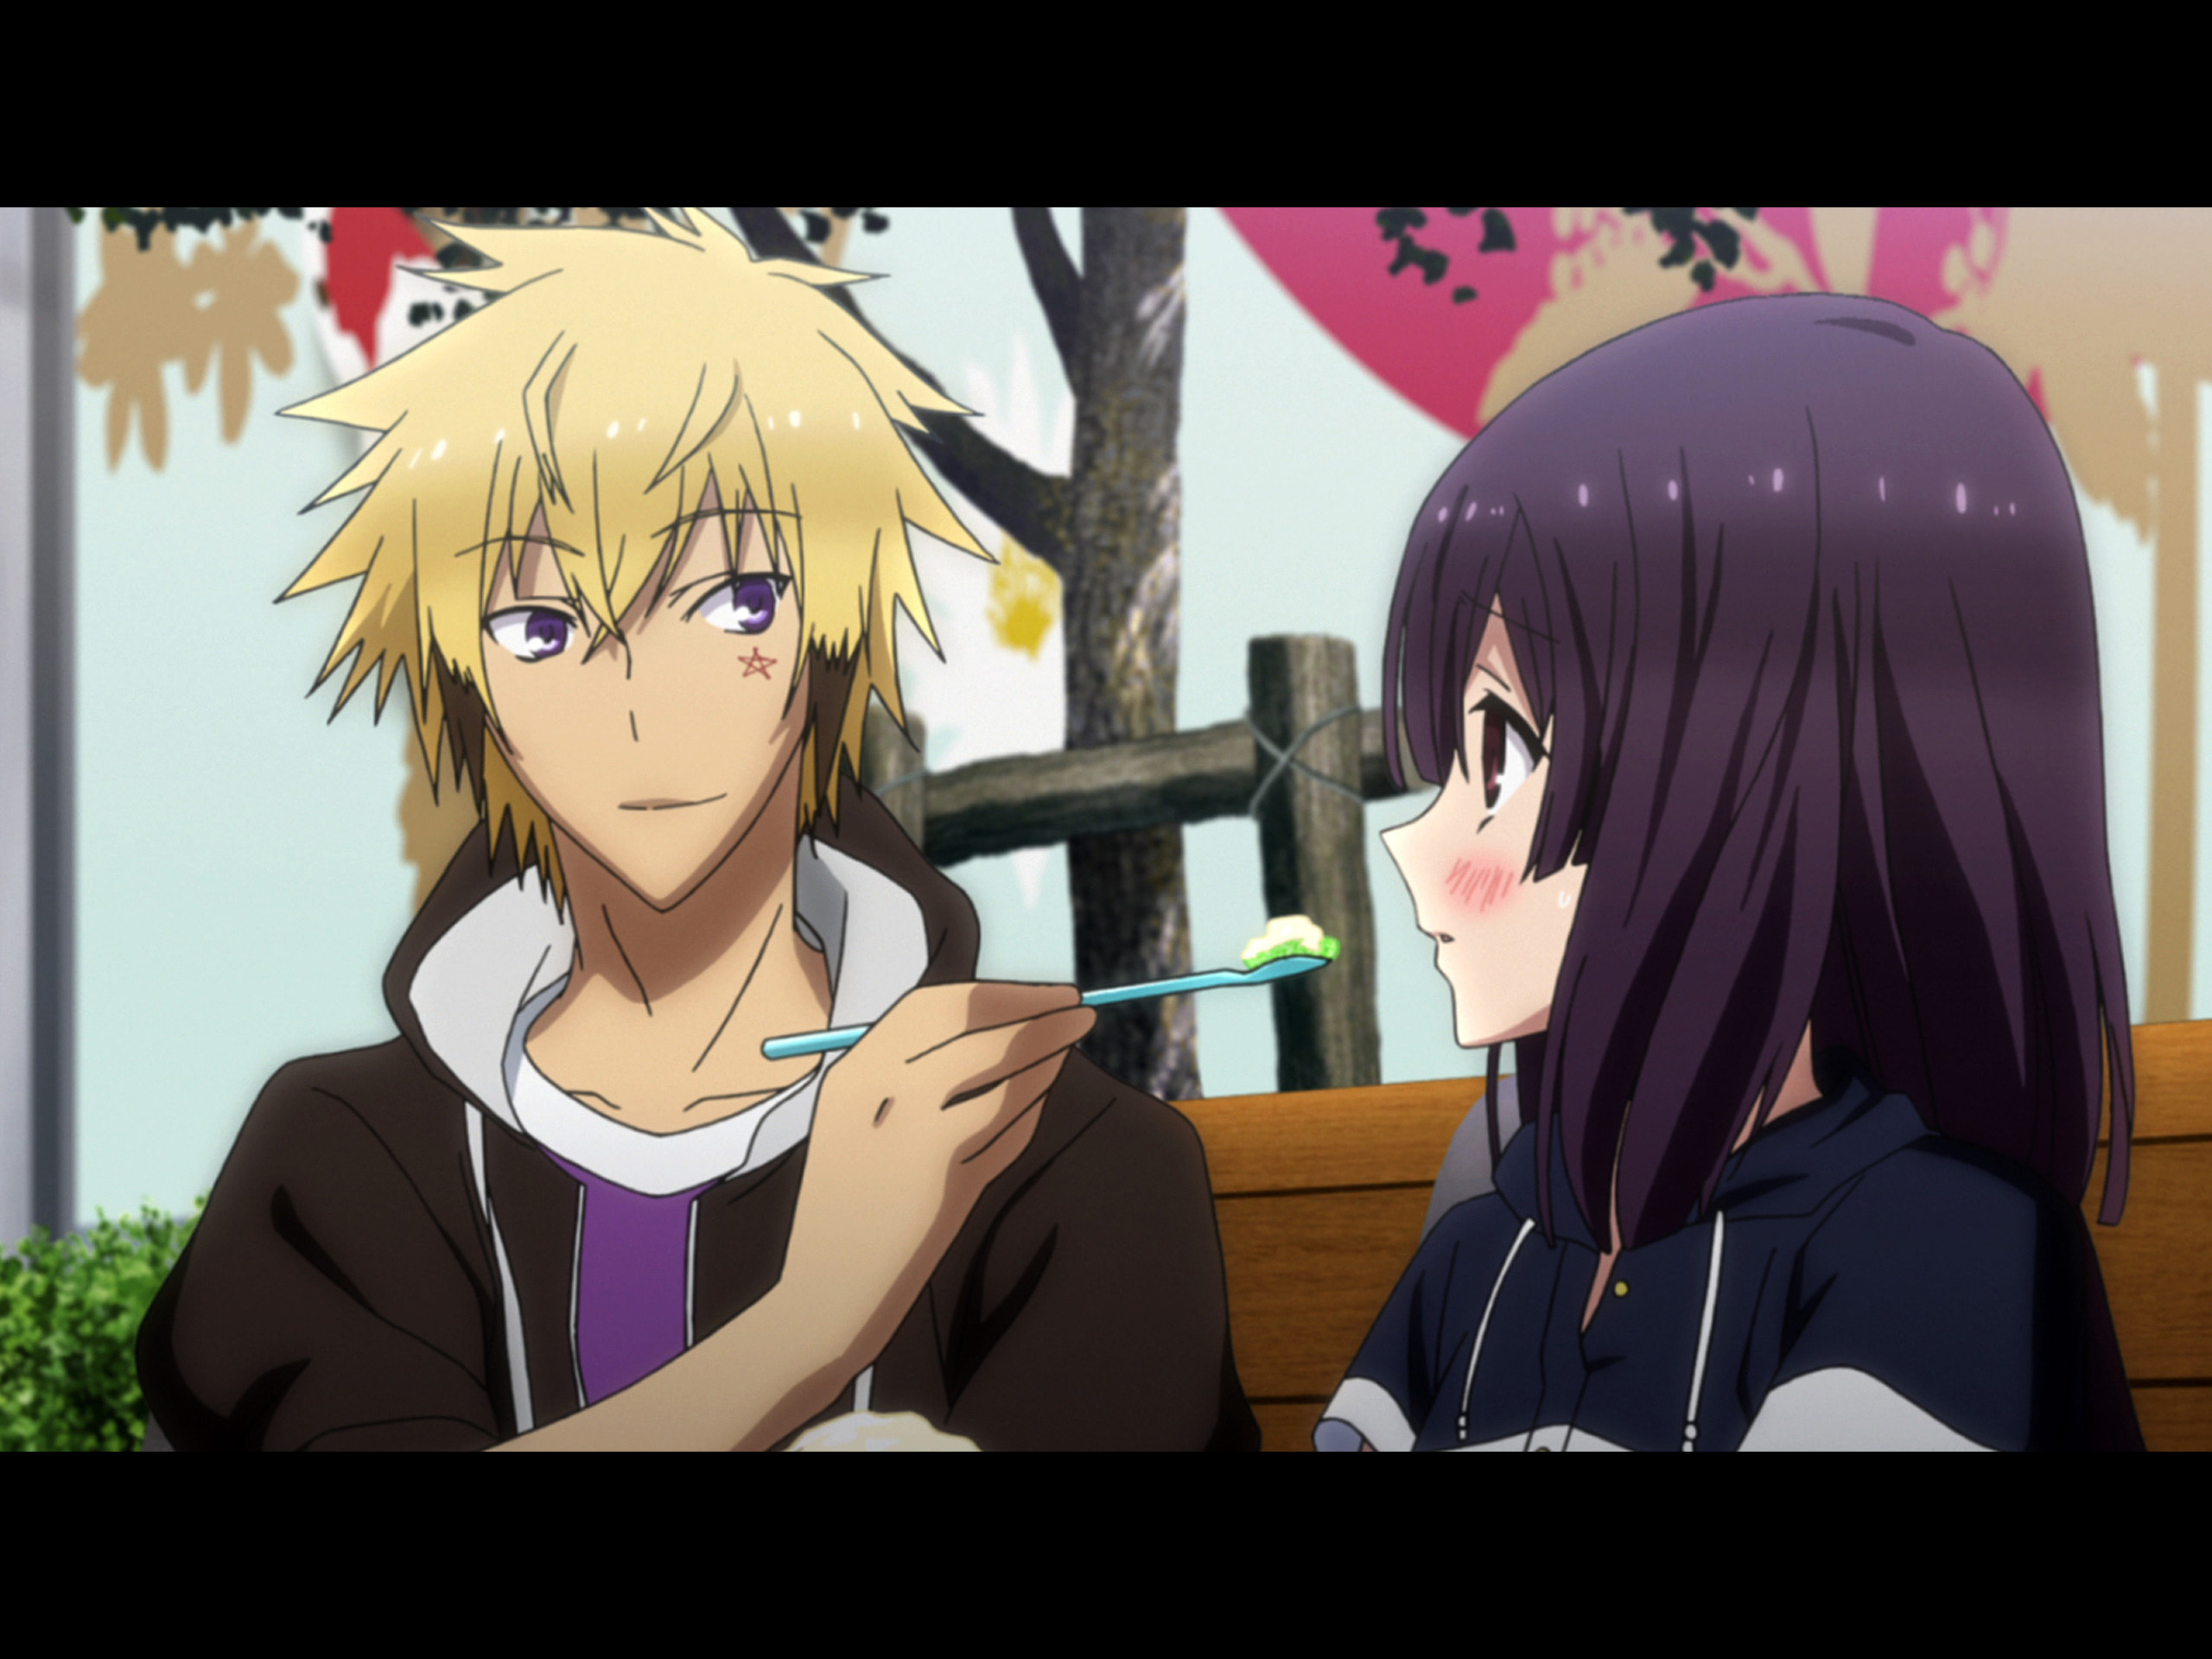 Breaking: Could Tokyo Ravens Season 2 Finally Be Happening? Latest Updates and Fan Theories Unveiled